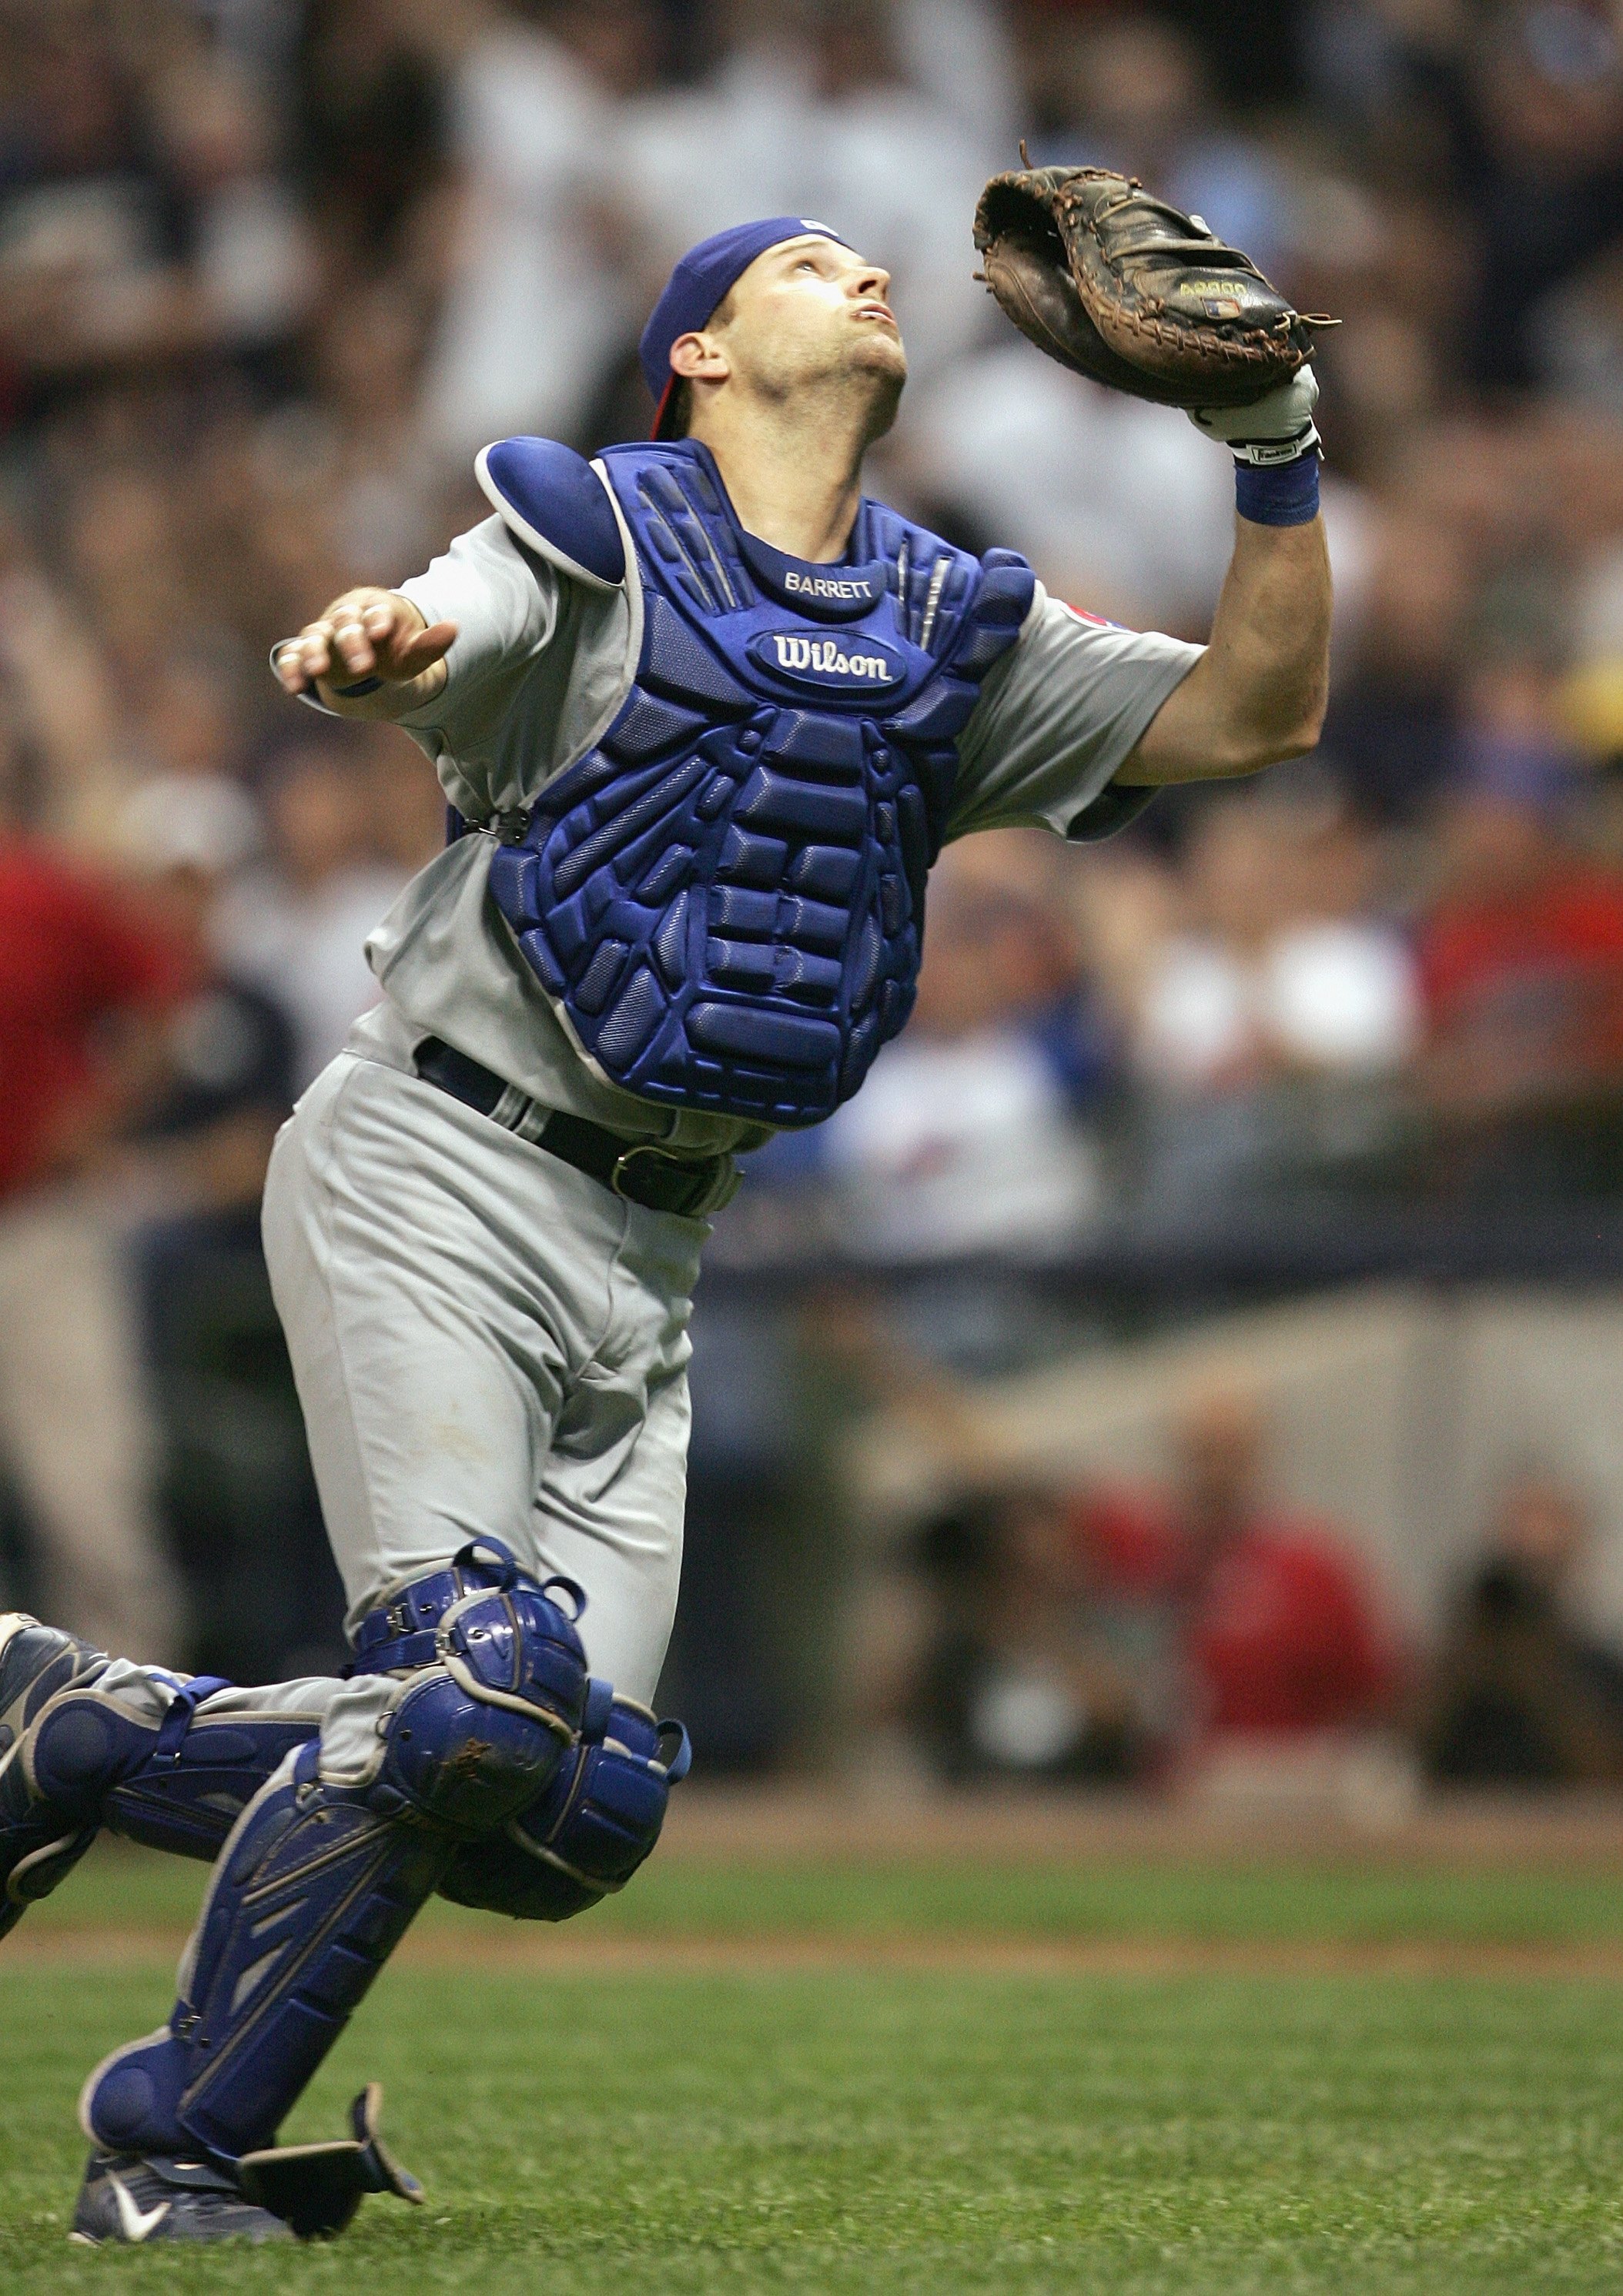 MILWAUKEE - JUNE 4: Catcher Michael Barrett #8 of the Chicago Cubs runs to make the catch against the Milwaukee Brewers at Miller Park on June 4, 2007 in Milwaukee, Wisconsin. (Photo by Jonathan Daniel/Getty Images)